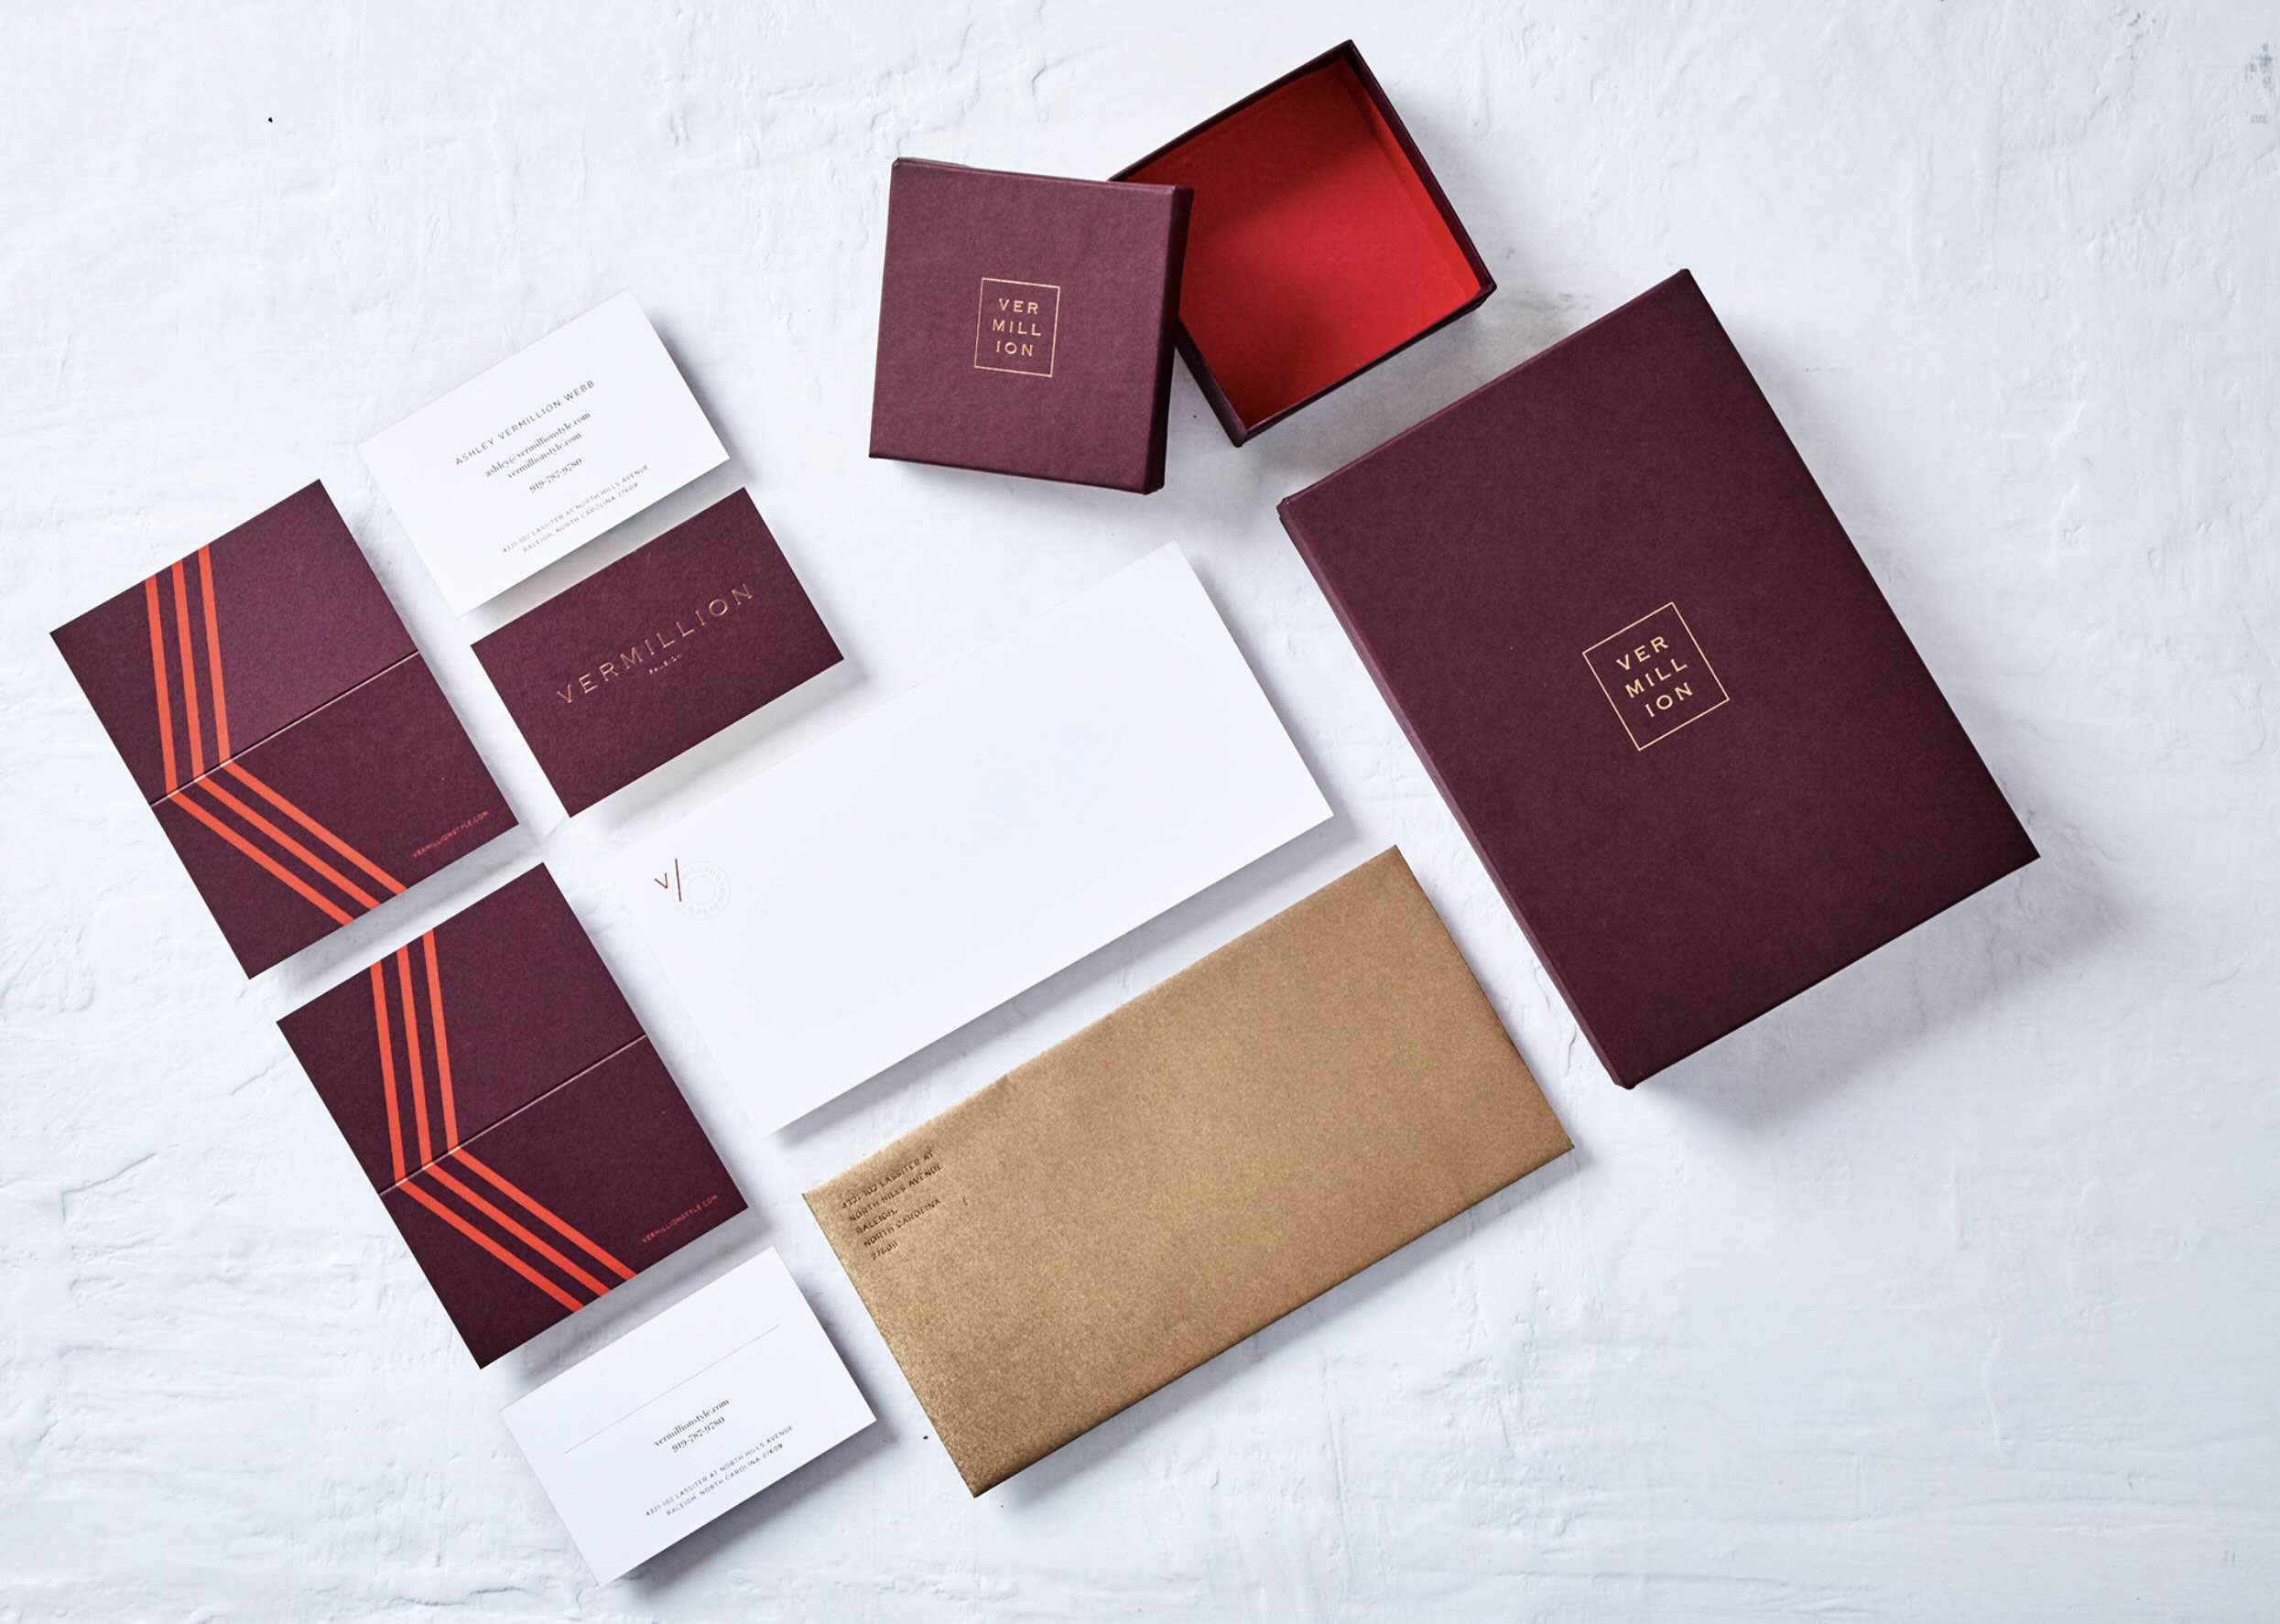 Revamping Your Home: Stitch Design Co's Stationary For DIY Projects